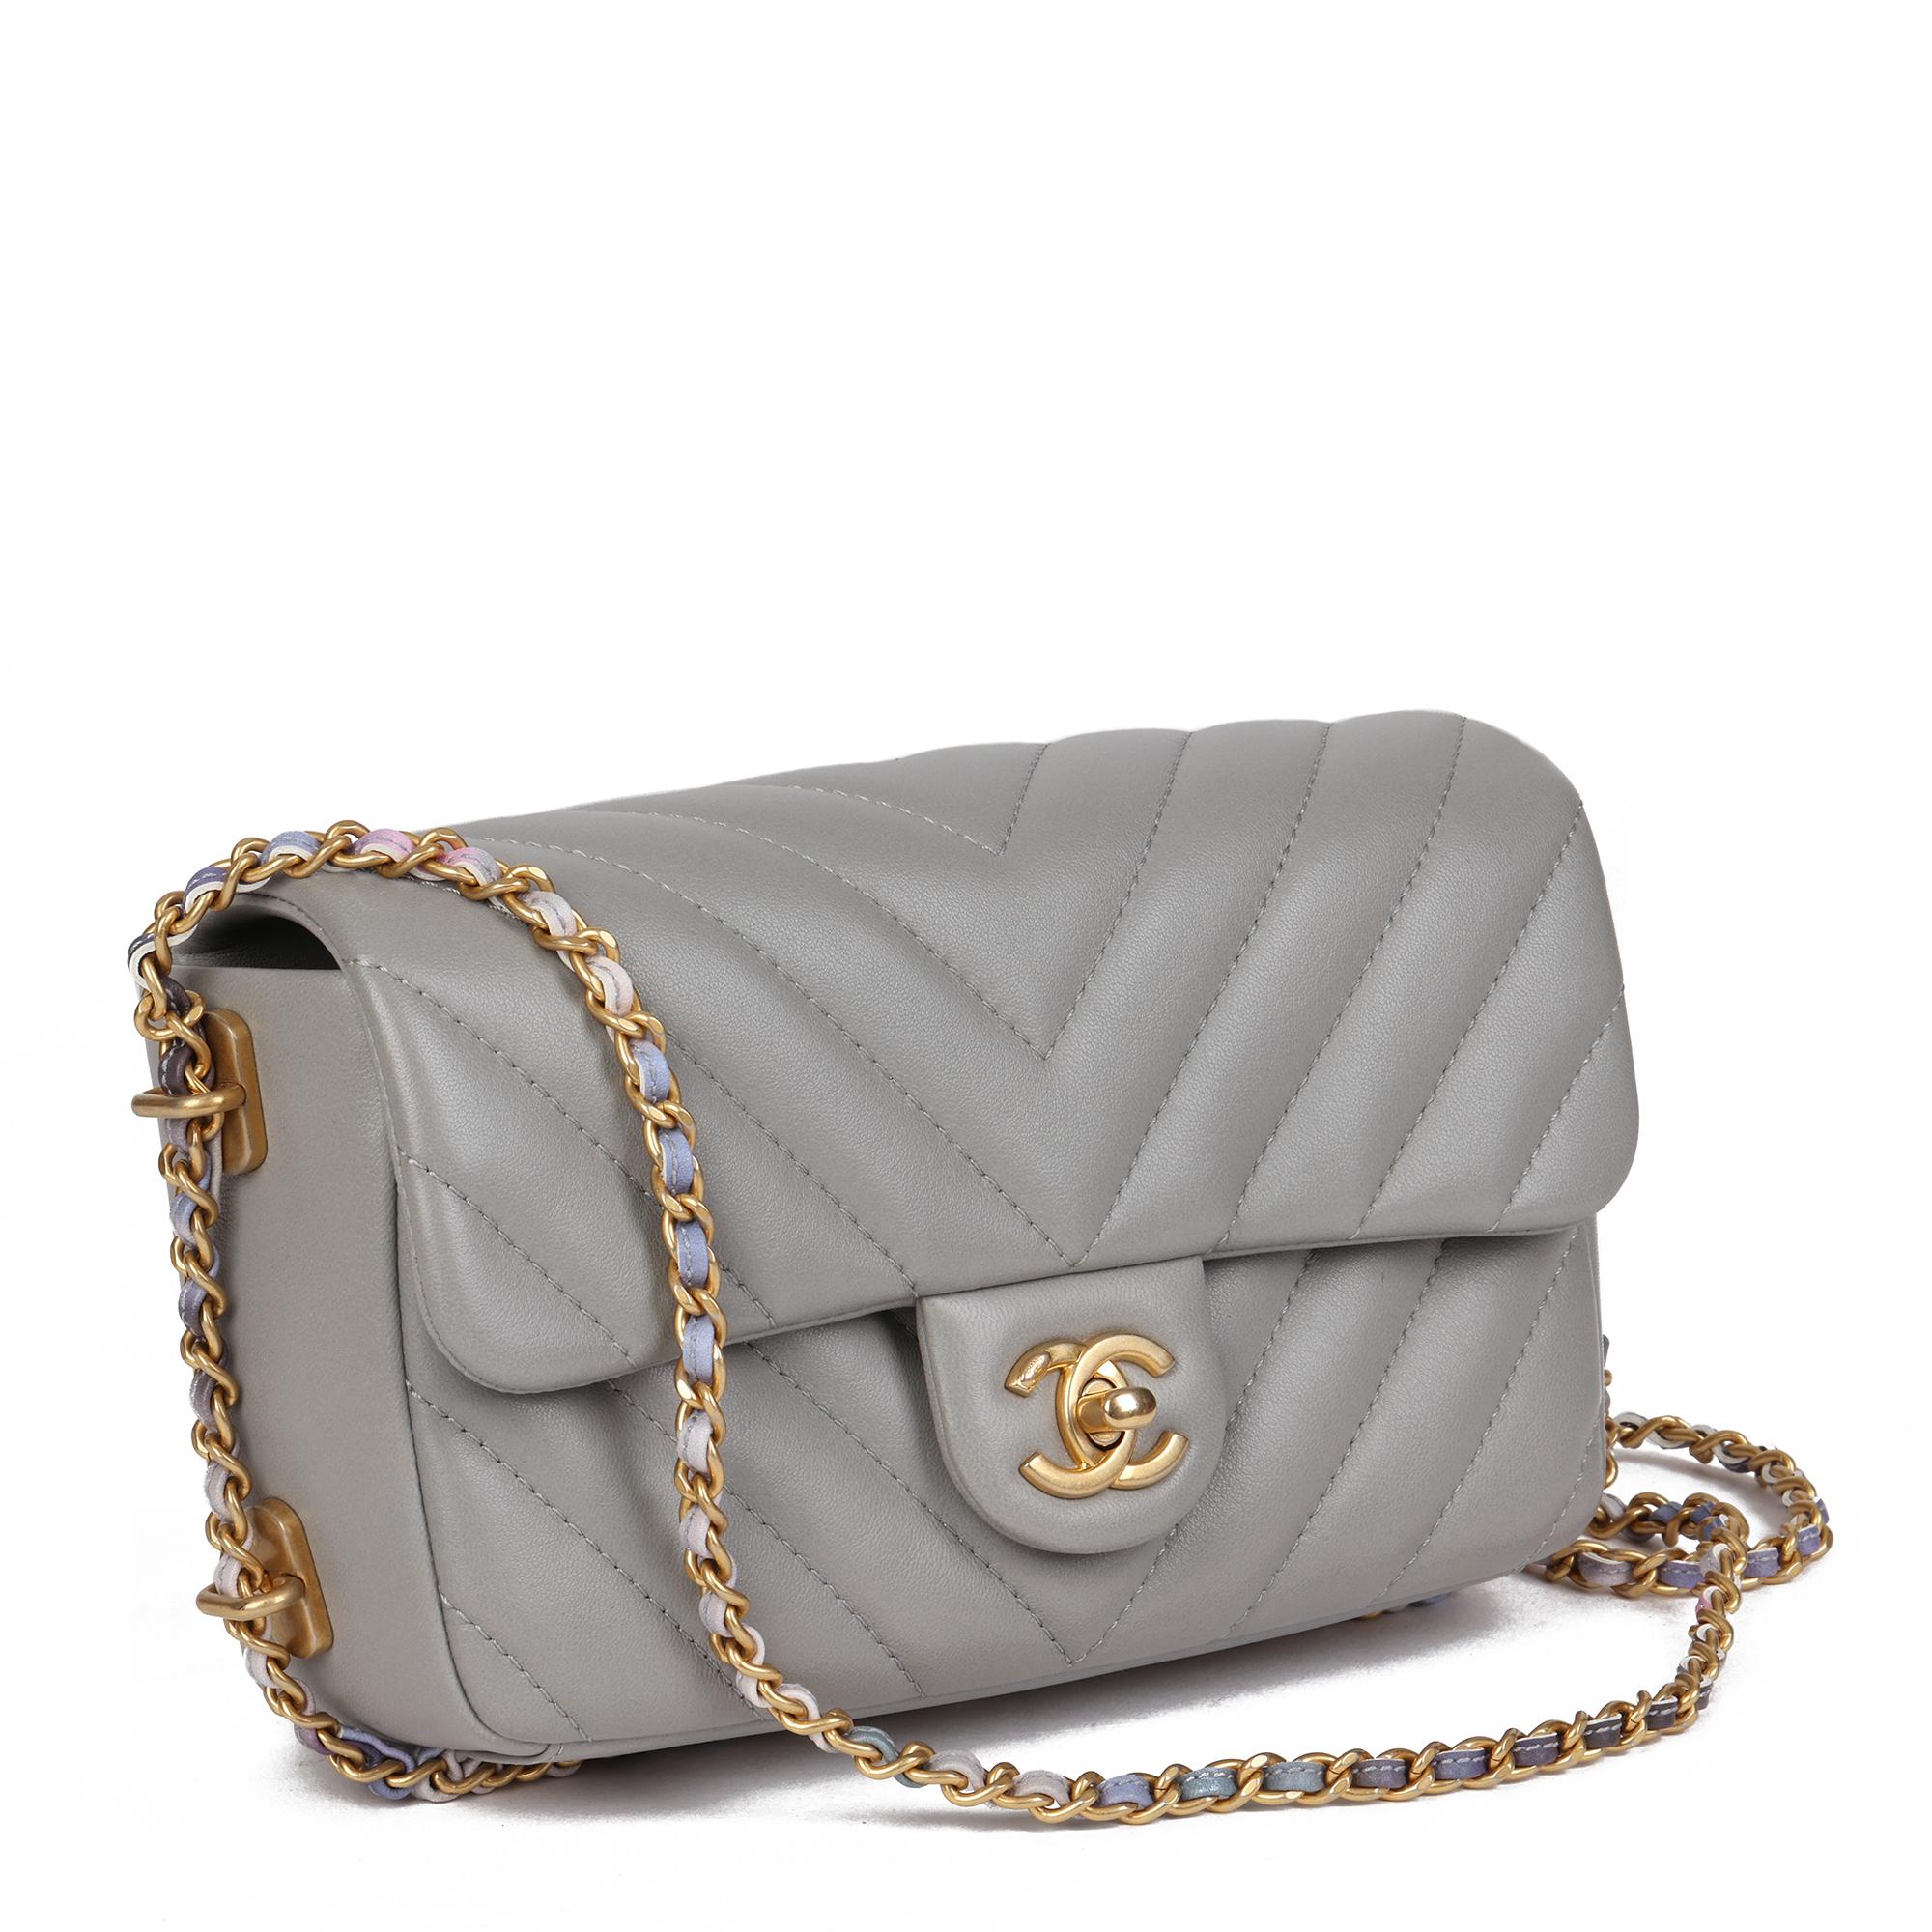 CHANEL
Grey Chevron Quilted Lambskin Chain Around Mini Rectangular Flap Bag

Serial Number: 25301129
Age (Circa): 2018
Accompanied By: Chanel Dust Bag, Box, Authenticity Card, Protective Felt, Care Booklet
Authenticity Details: Authenticity Card,